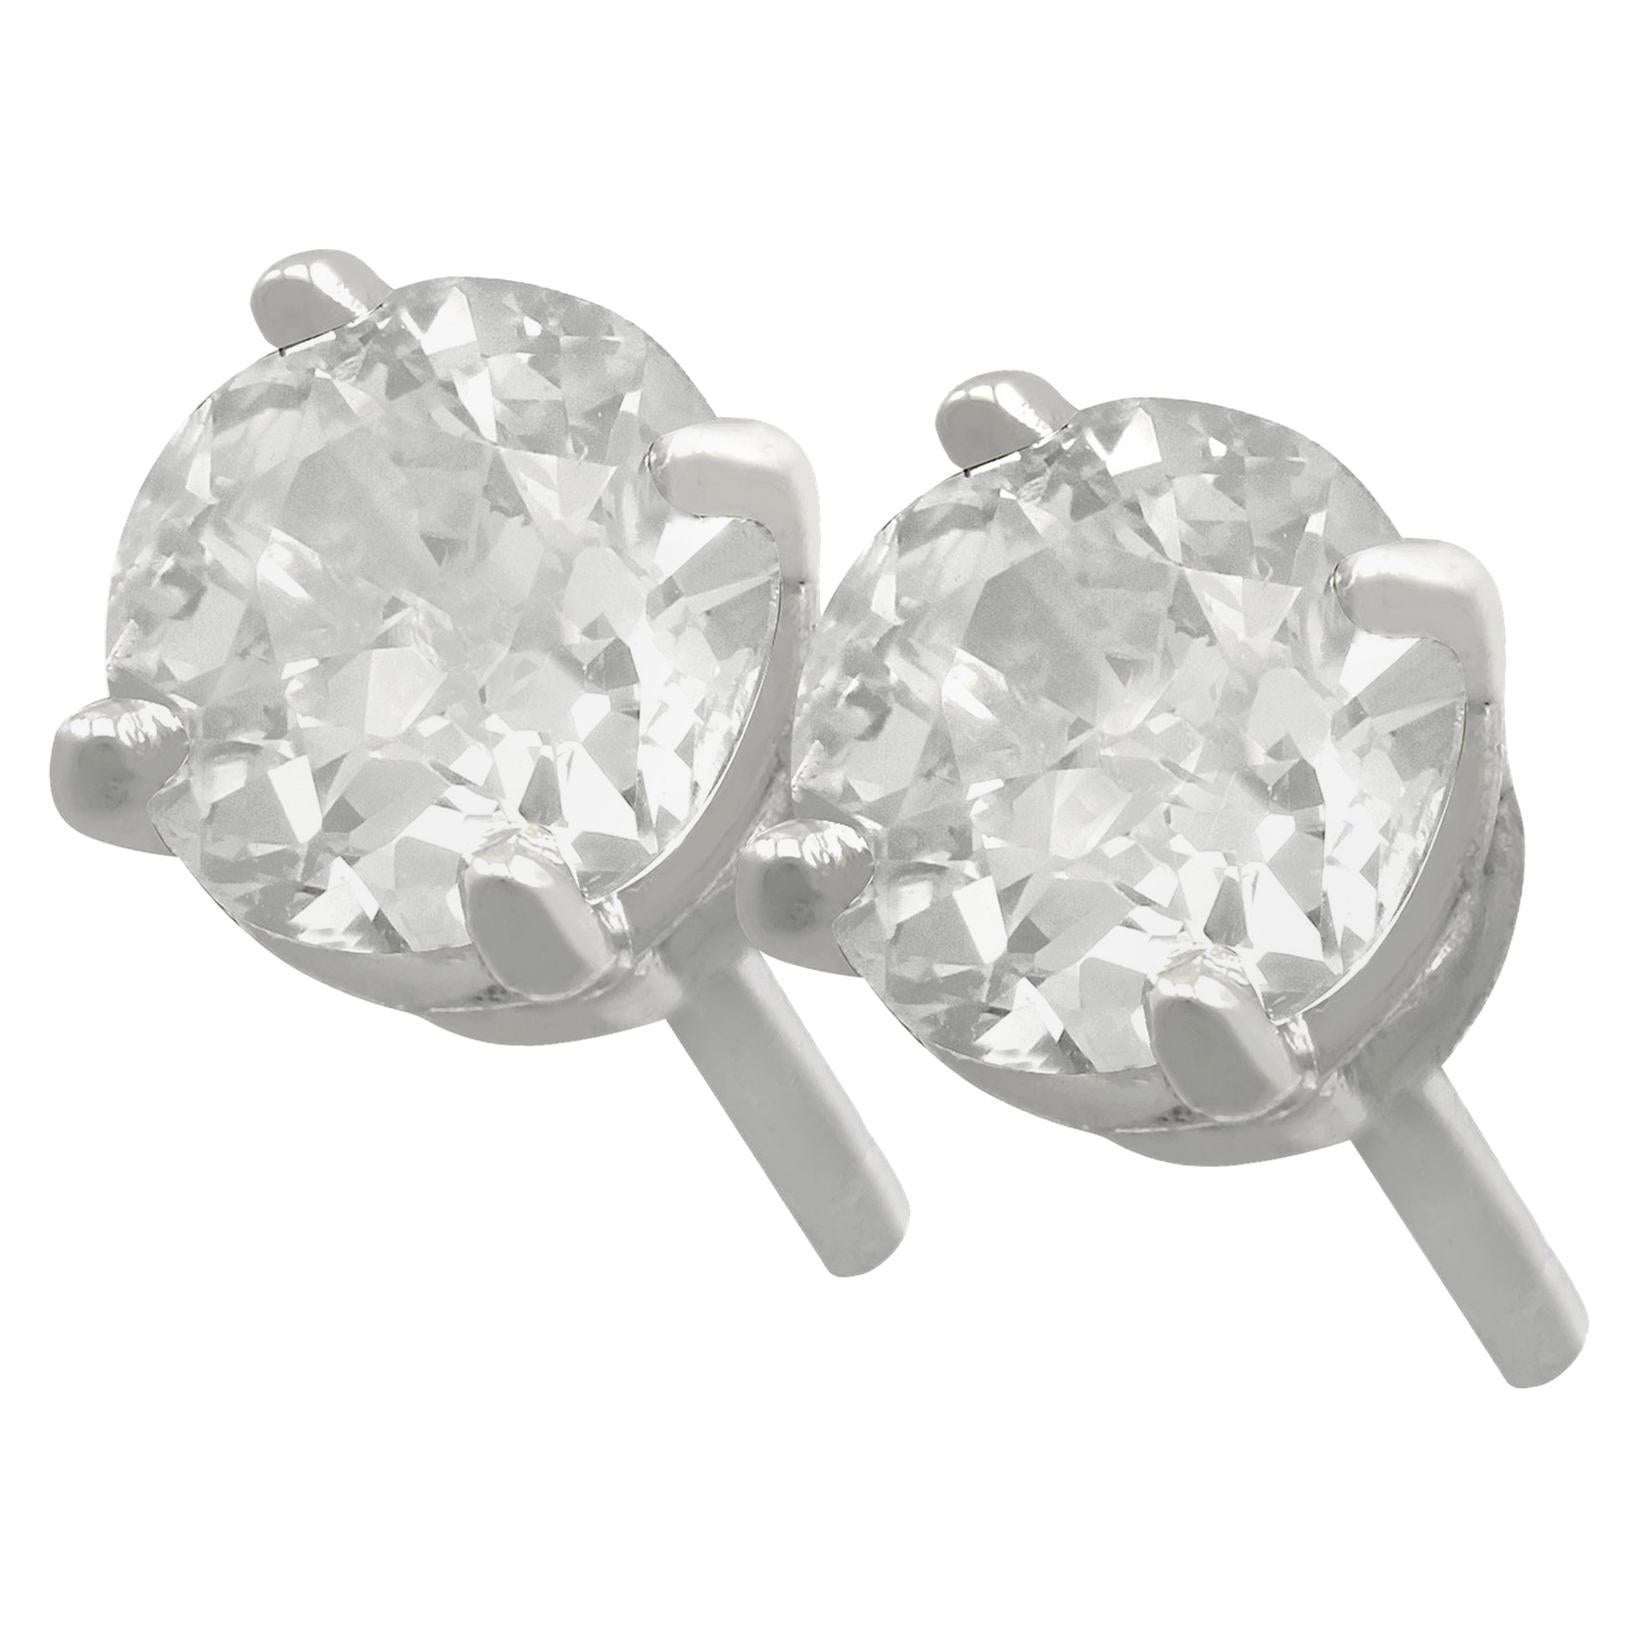 Antique and Contemporary 1.28 Carat Diamond and Platinum Stud Earrings